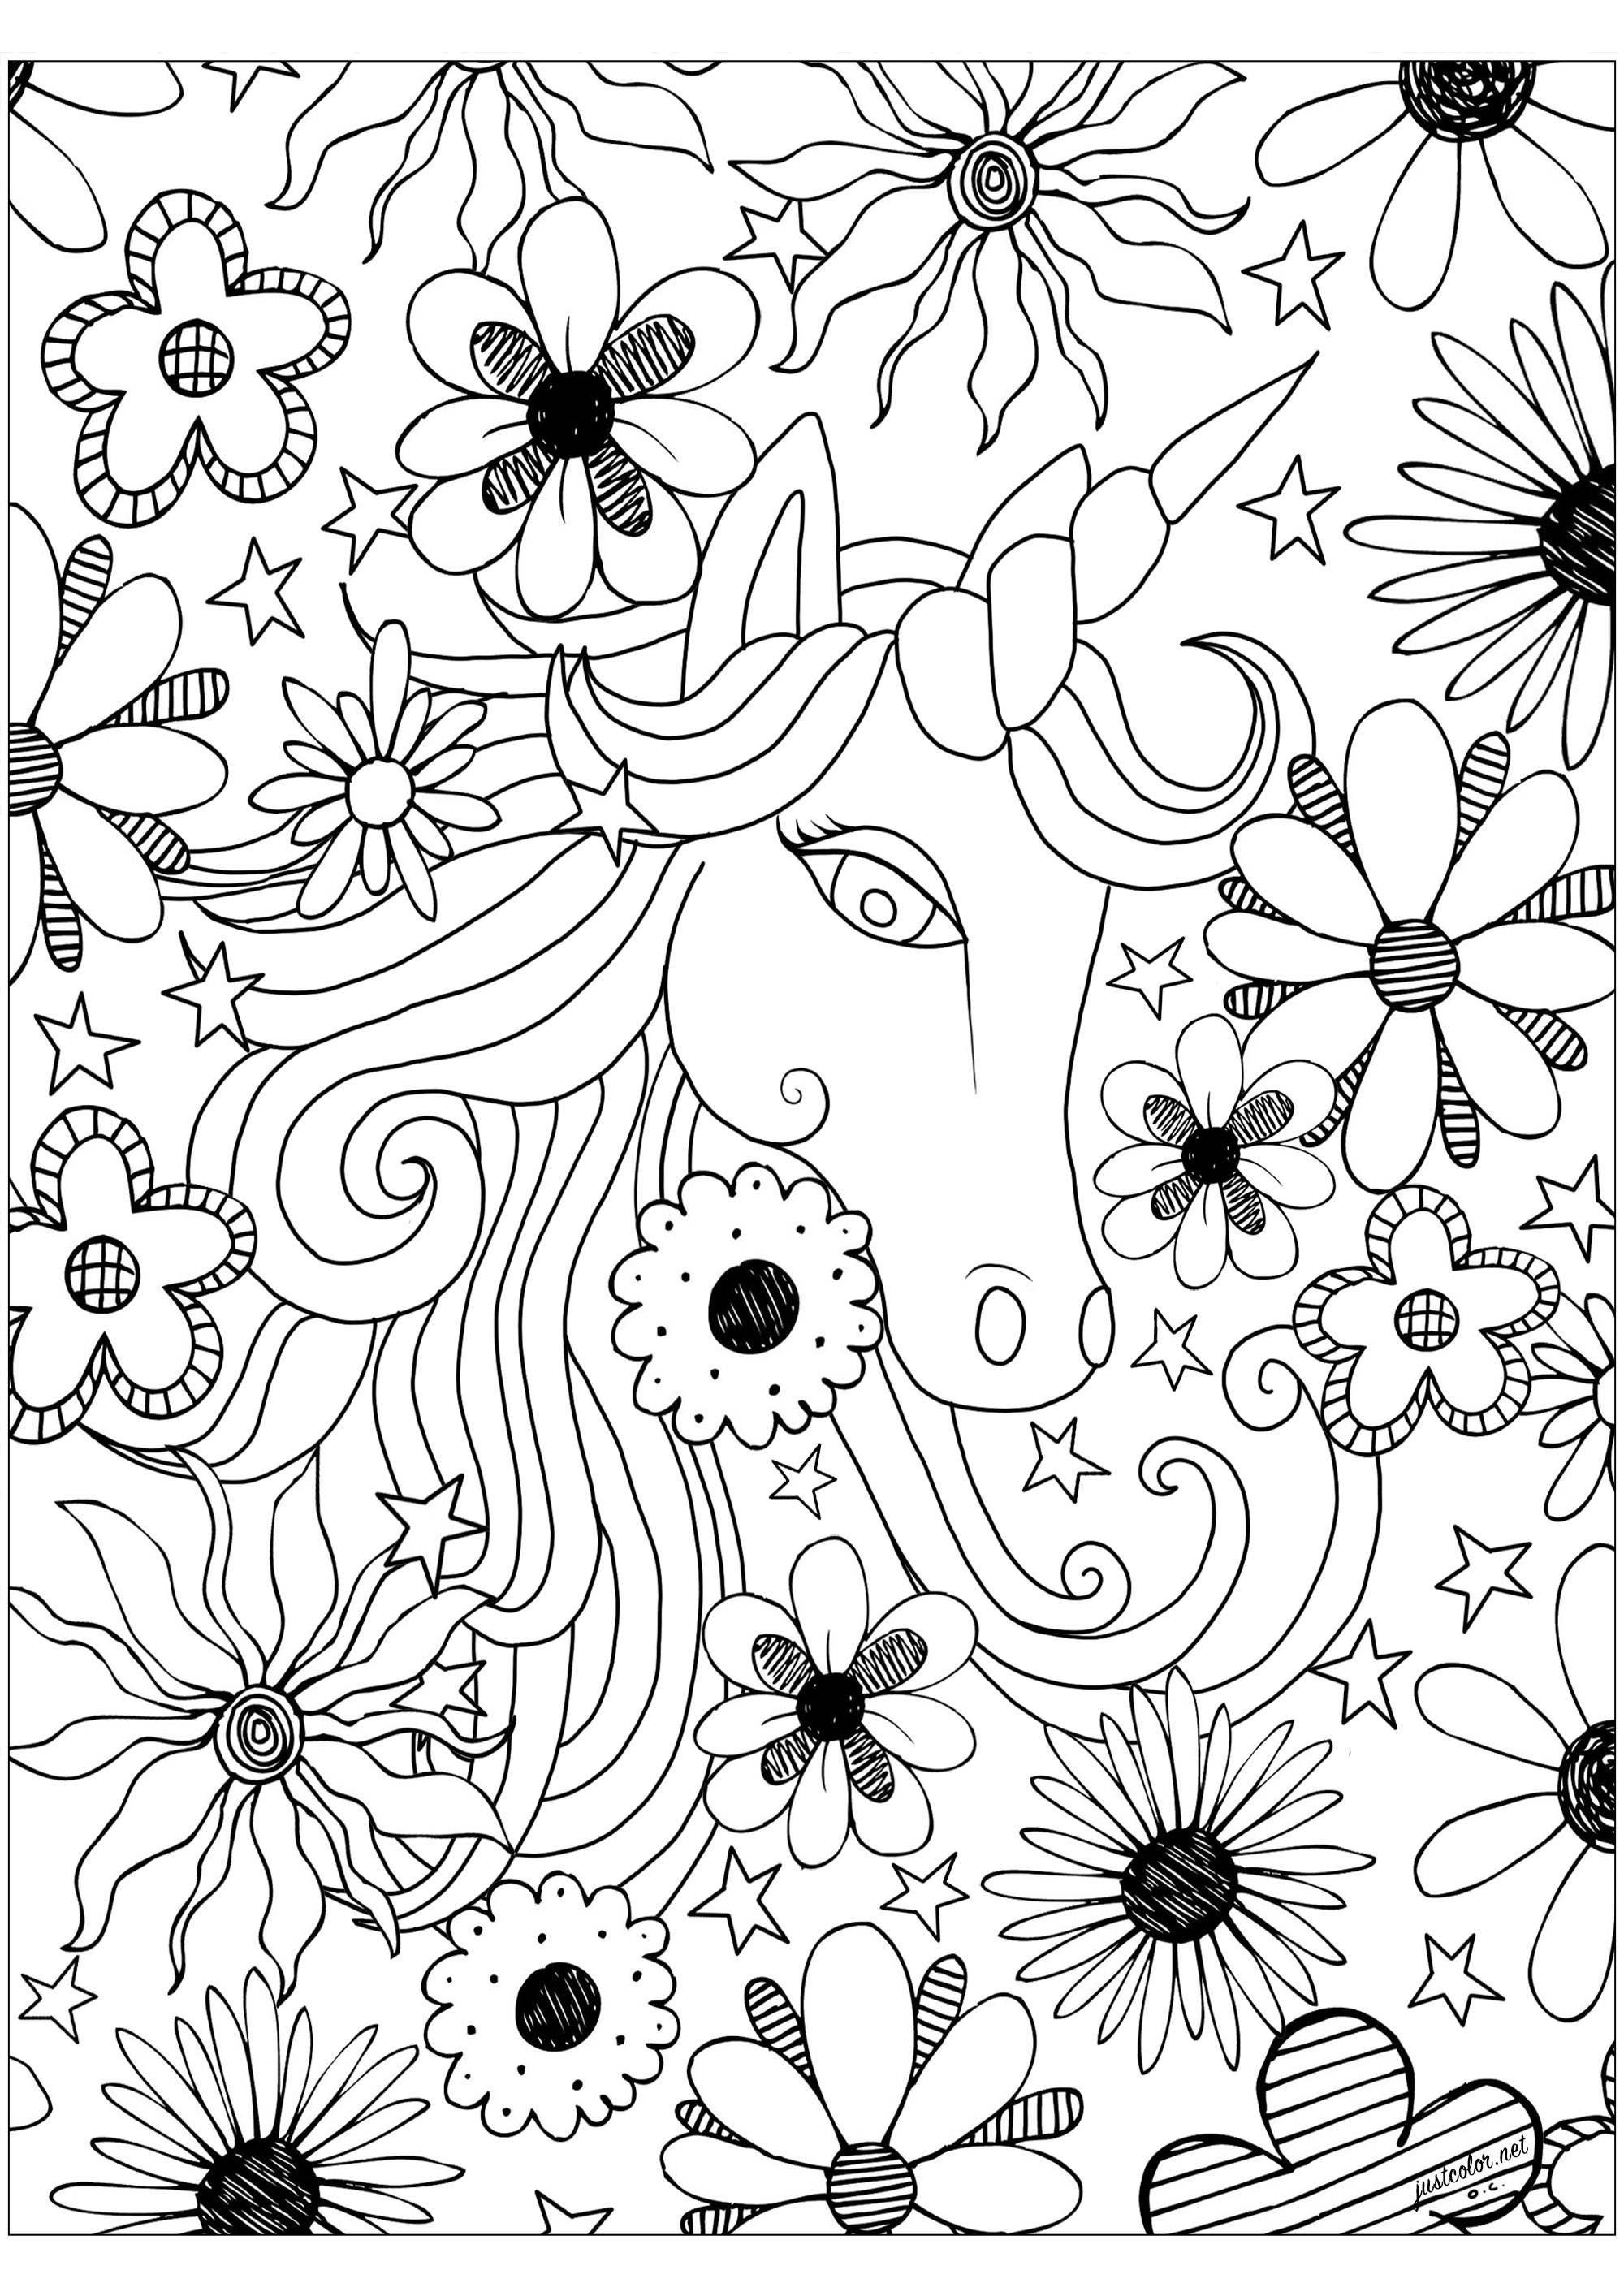 Wonderful unicorn and cute flowers   Unicorns Adult Coloring Pages